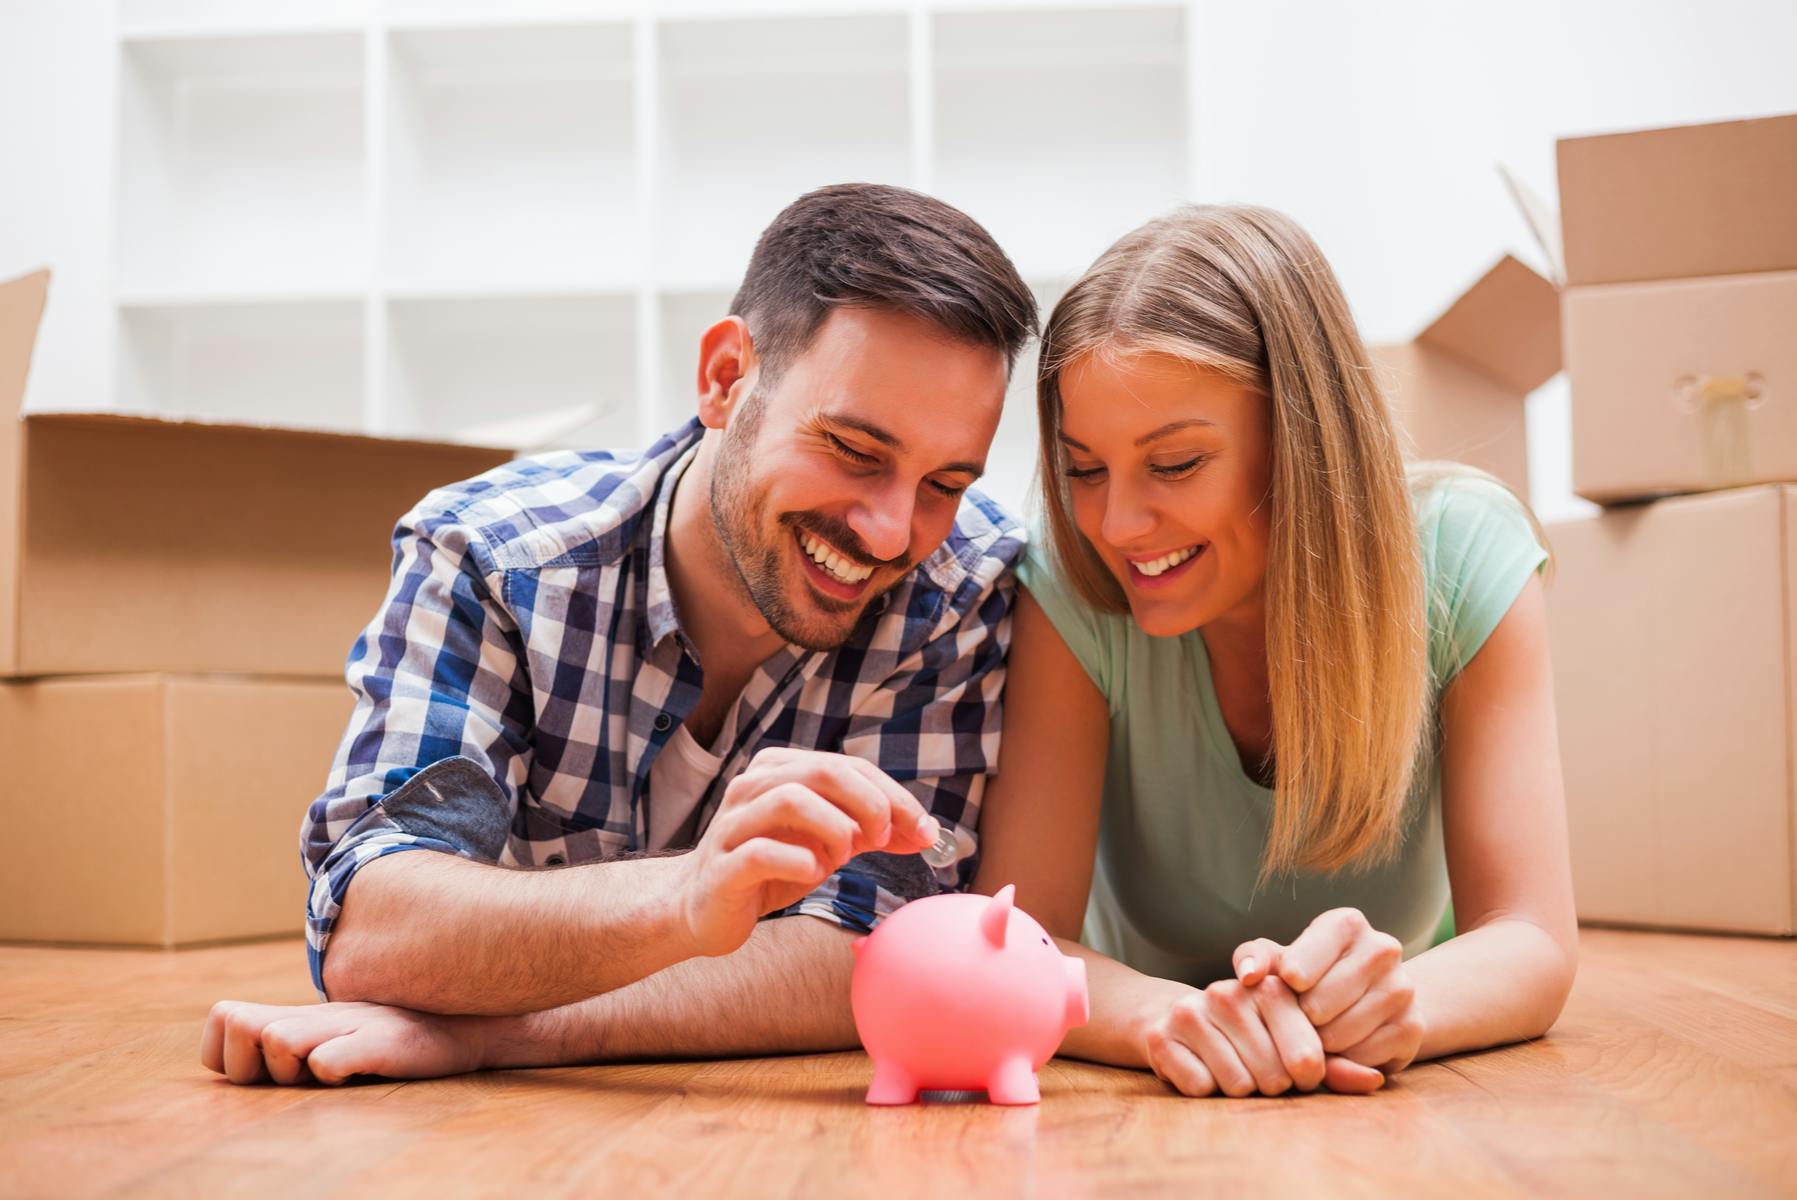 Man and woman lying on floor with a piggy bank